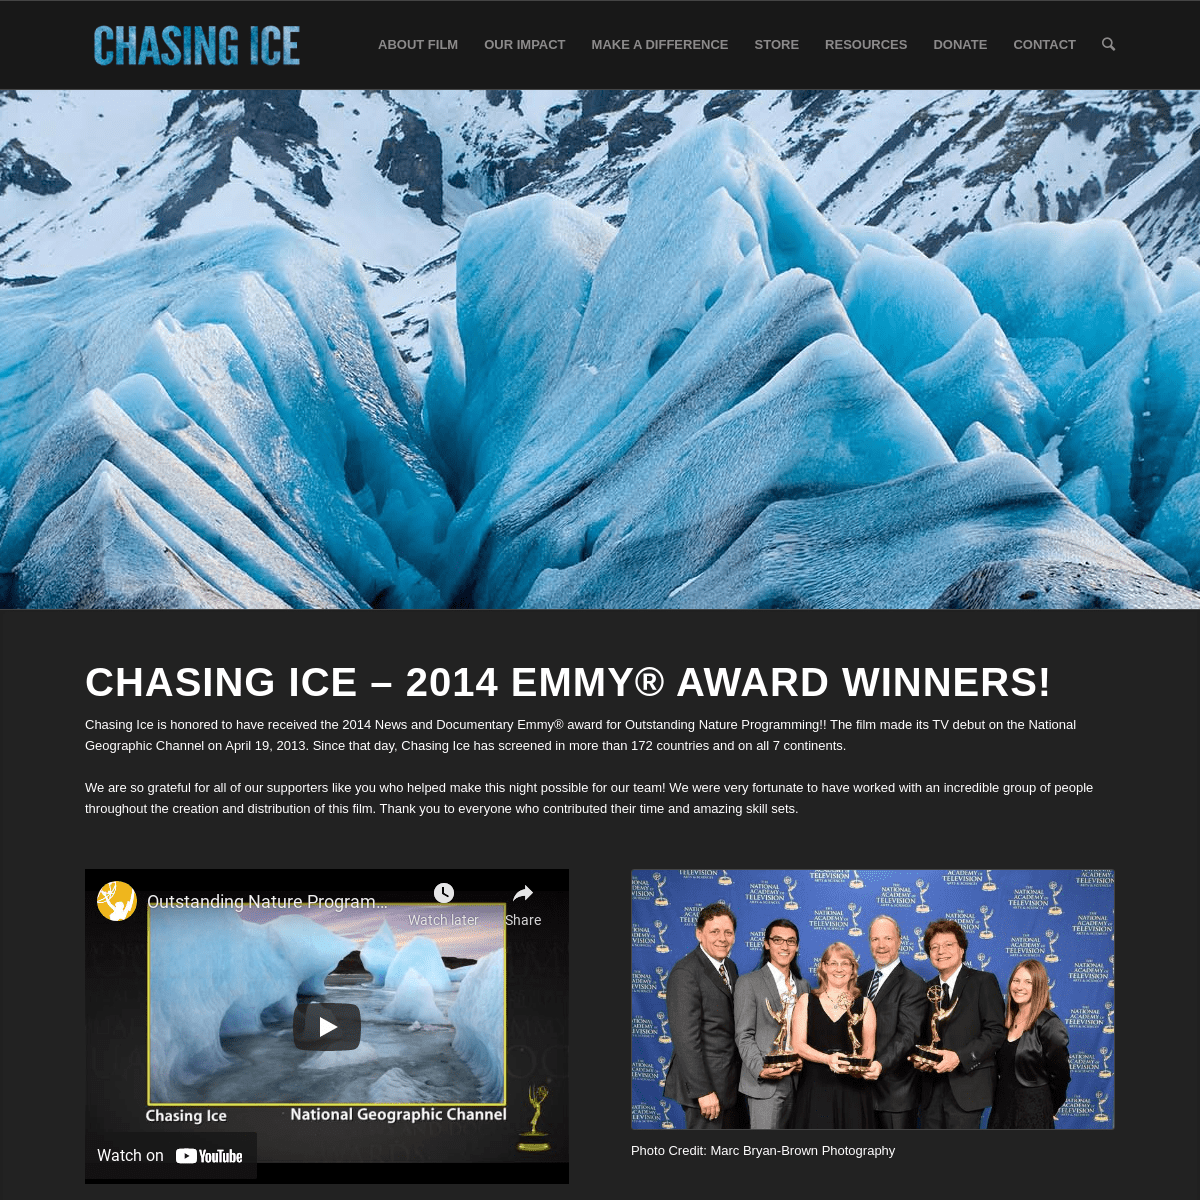 A complete backup of https://chasingice.com